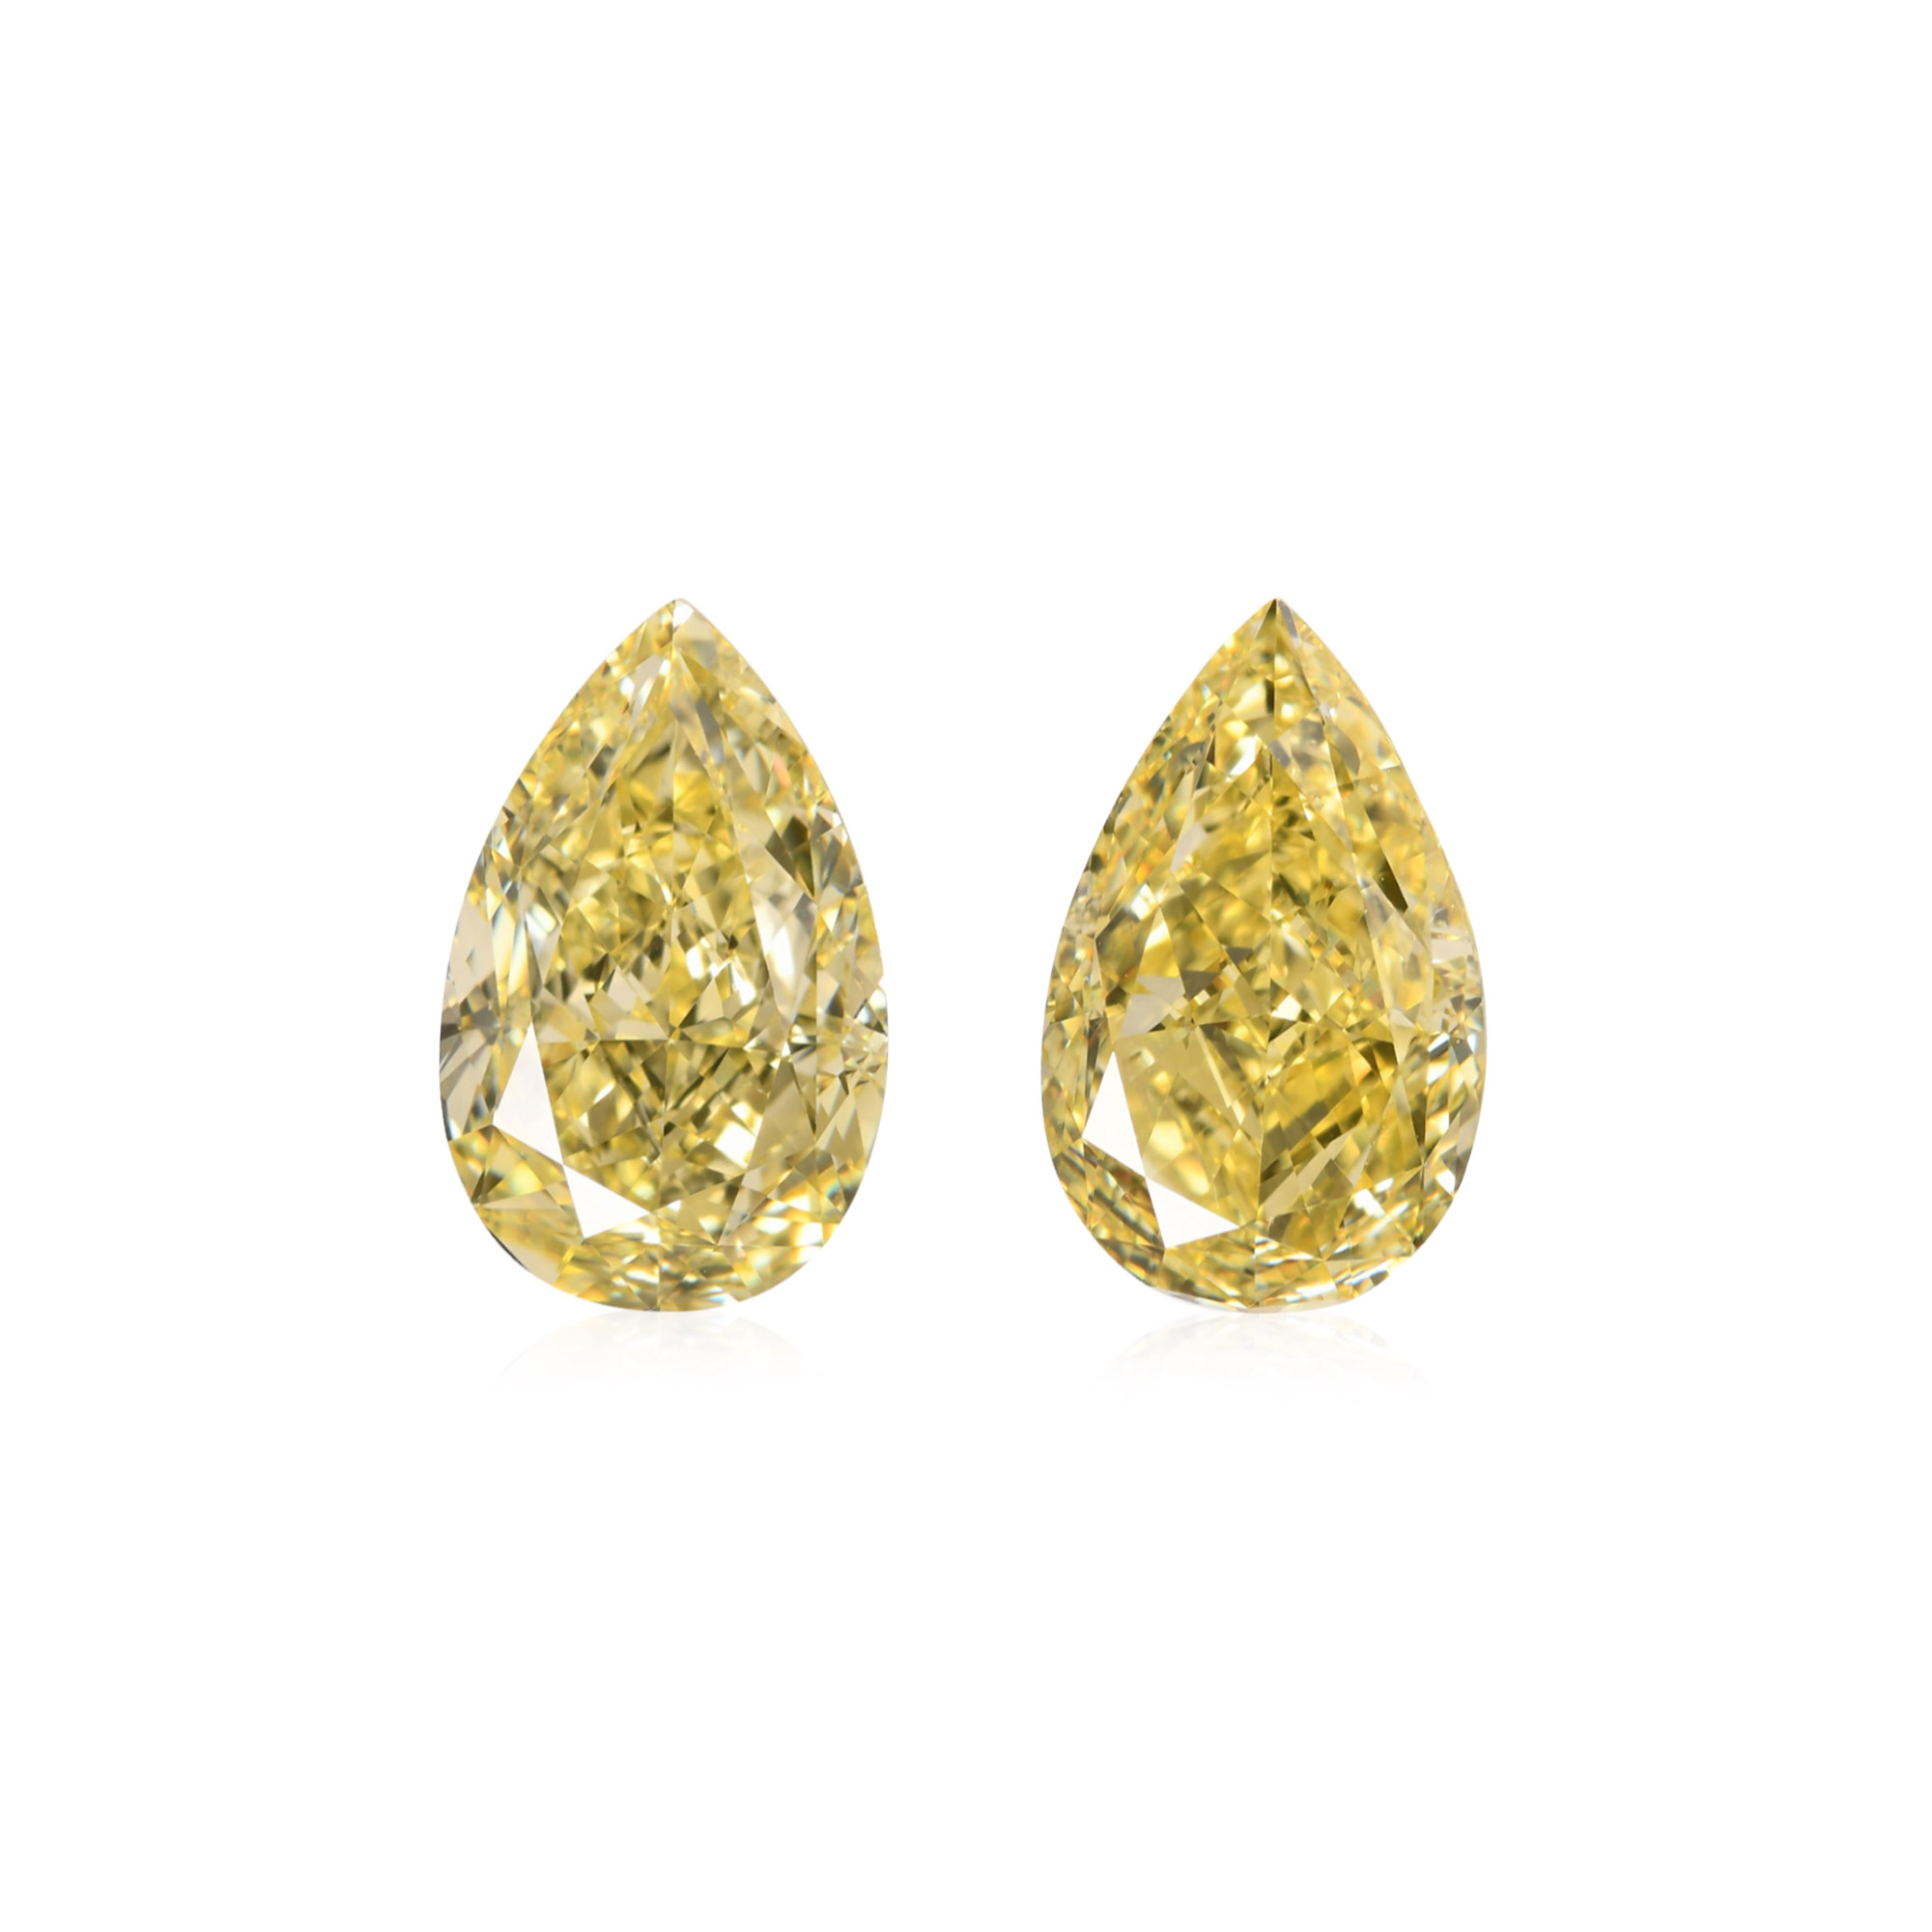 A pear-shaped D-color diamond of 5.06 carats and a pear-shaped